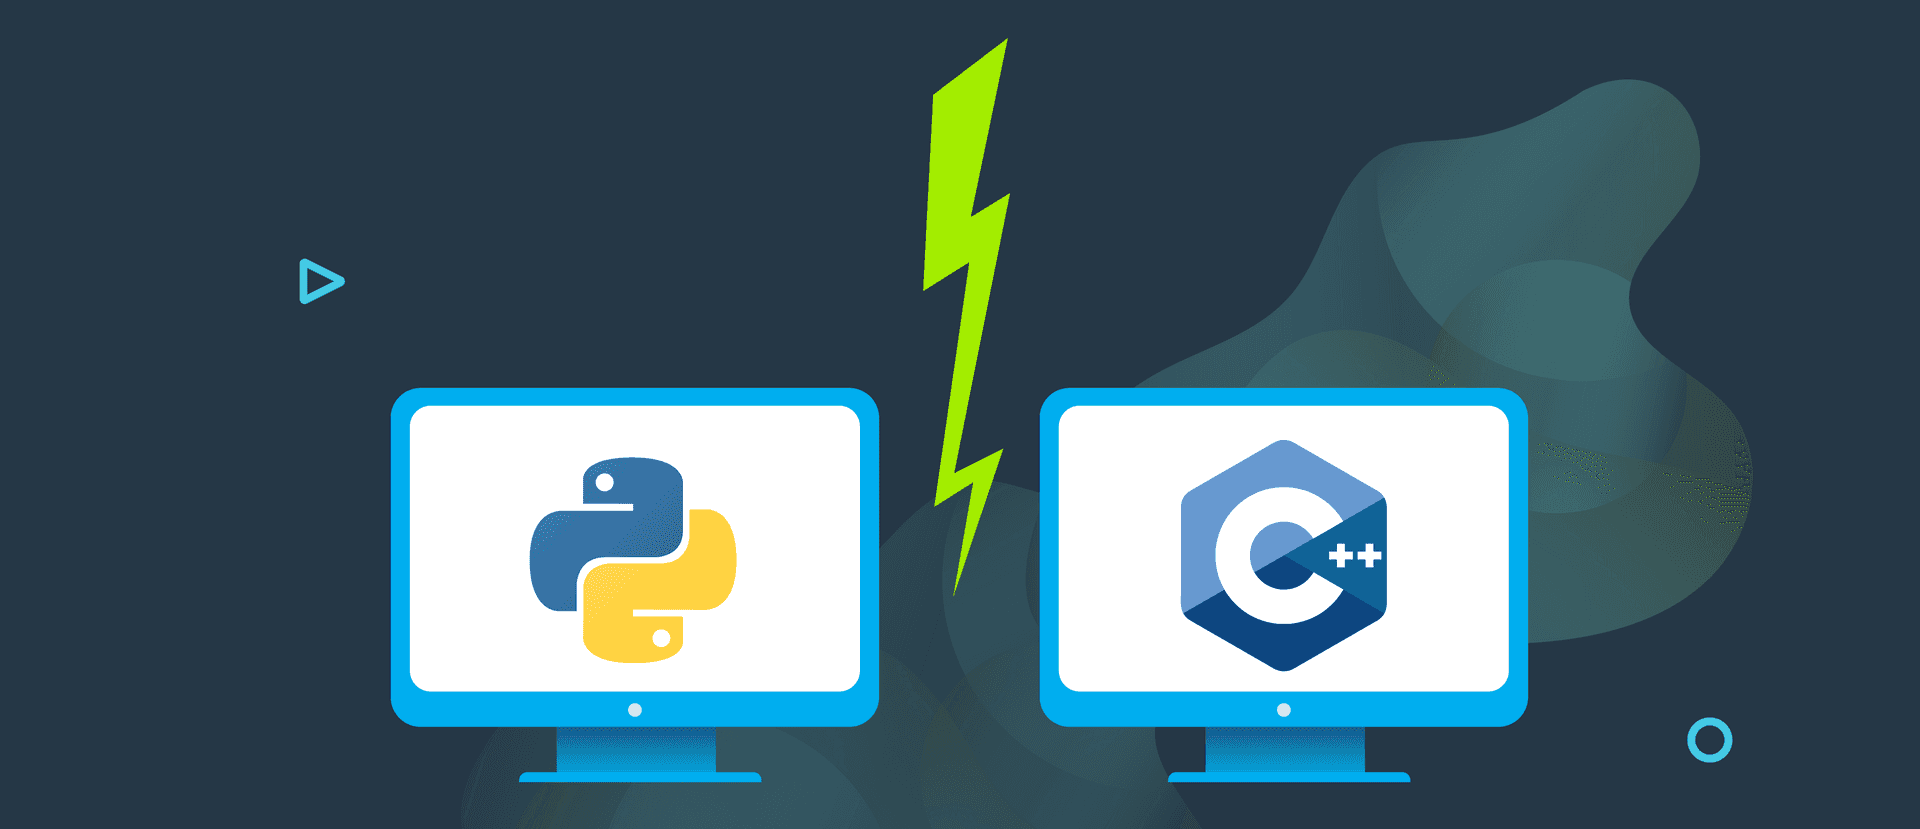 Thumbnail of an article about Python vs. C++ — what is the difference between these languages?